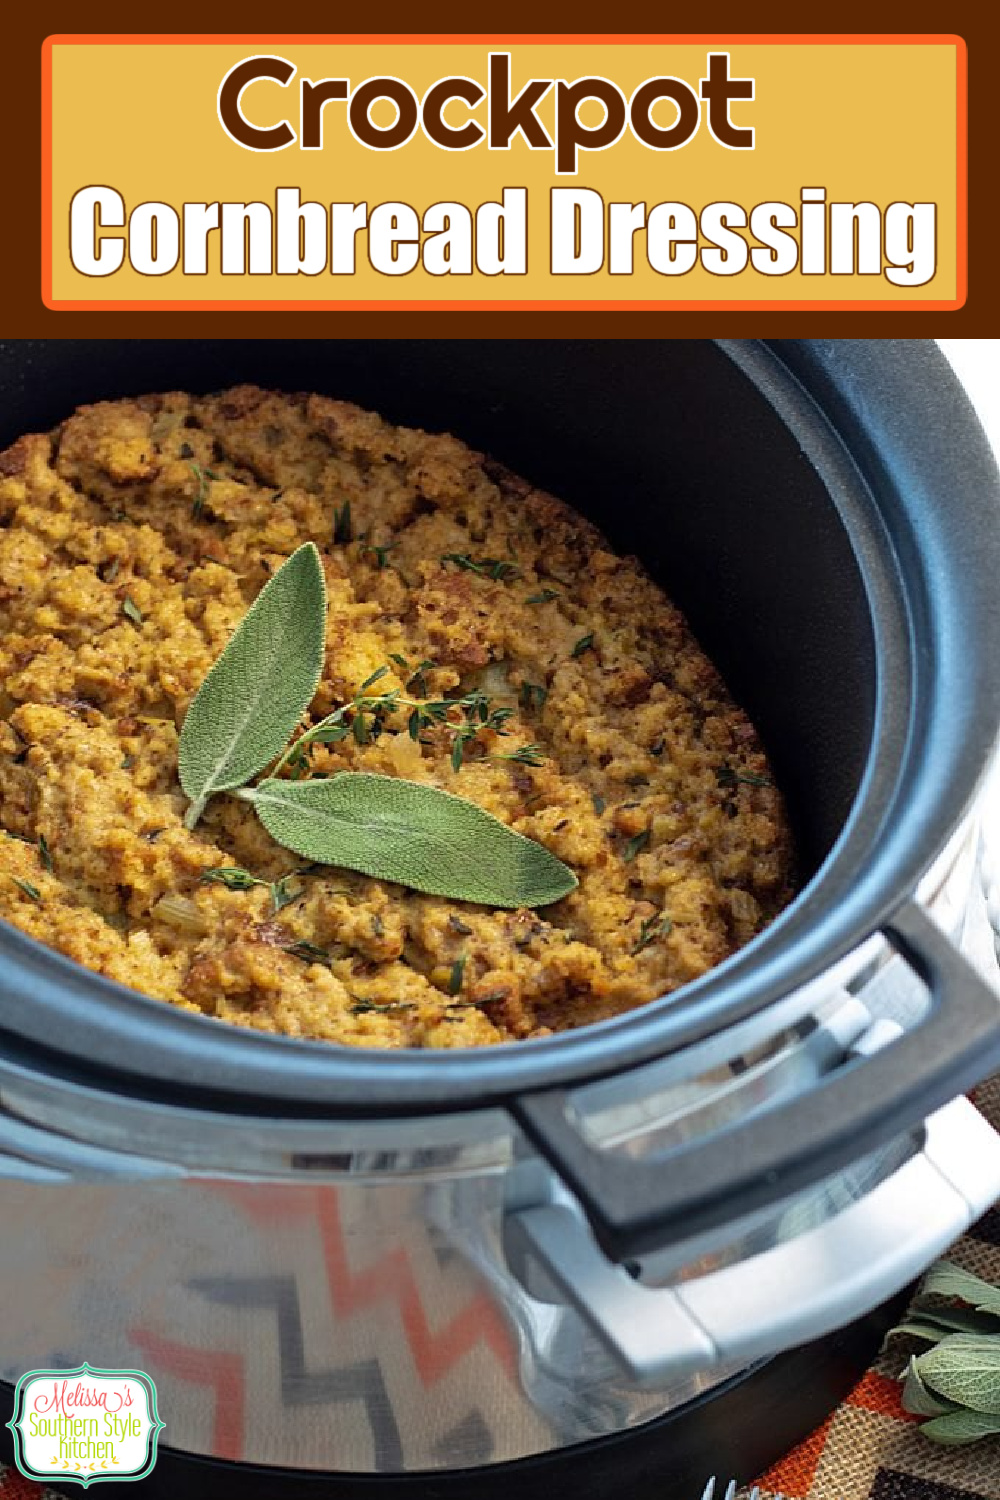 Free up oven space and make mouthwatering cornbread dressing in your crockpot #cornbreadressing #slowcookerrecipes #southerncornbreaddressing #crockpotdressing #easycornbreaddressing #bestthanksgivingrecipes via @melissasssk